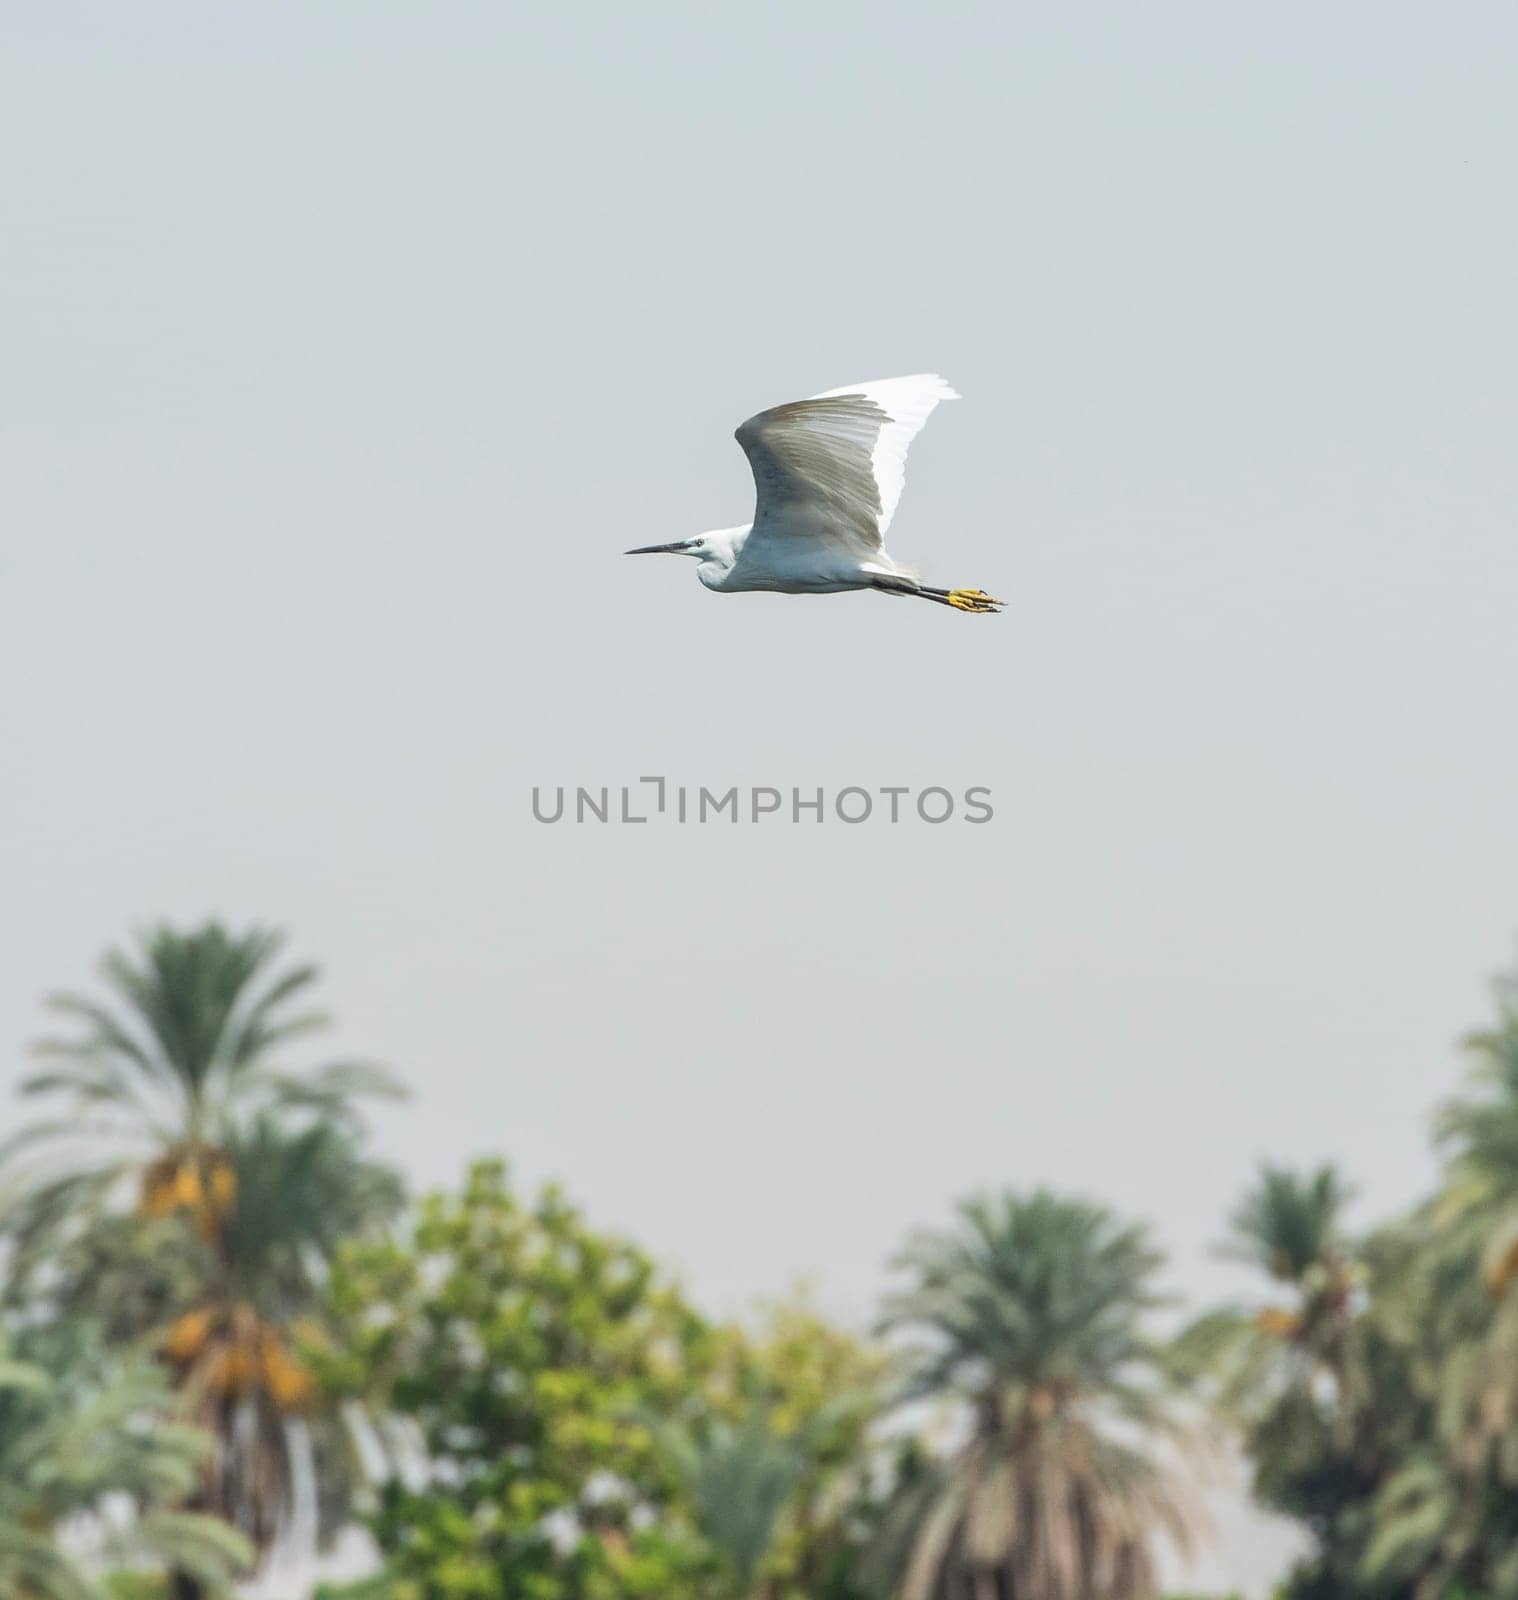 Great egret ardea alba in flight with wings spread over tropical palm tree background